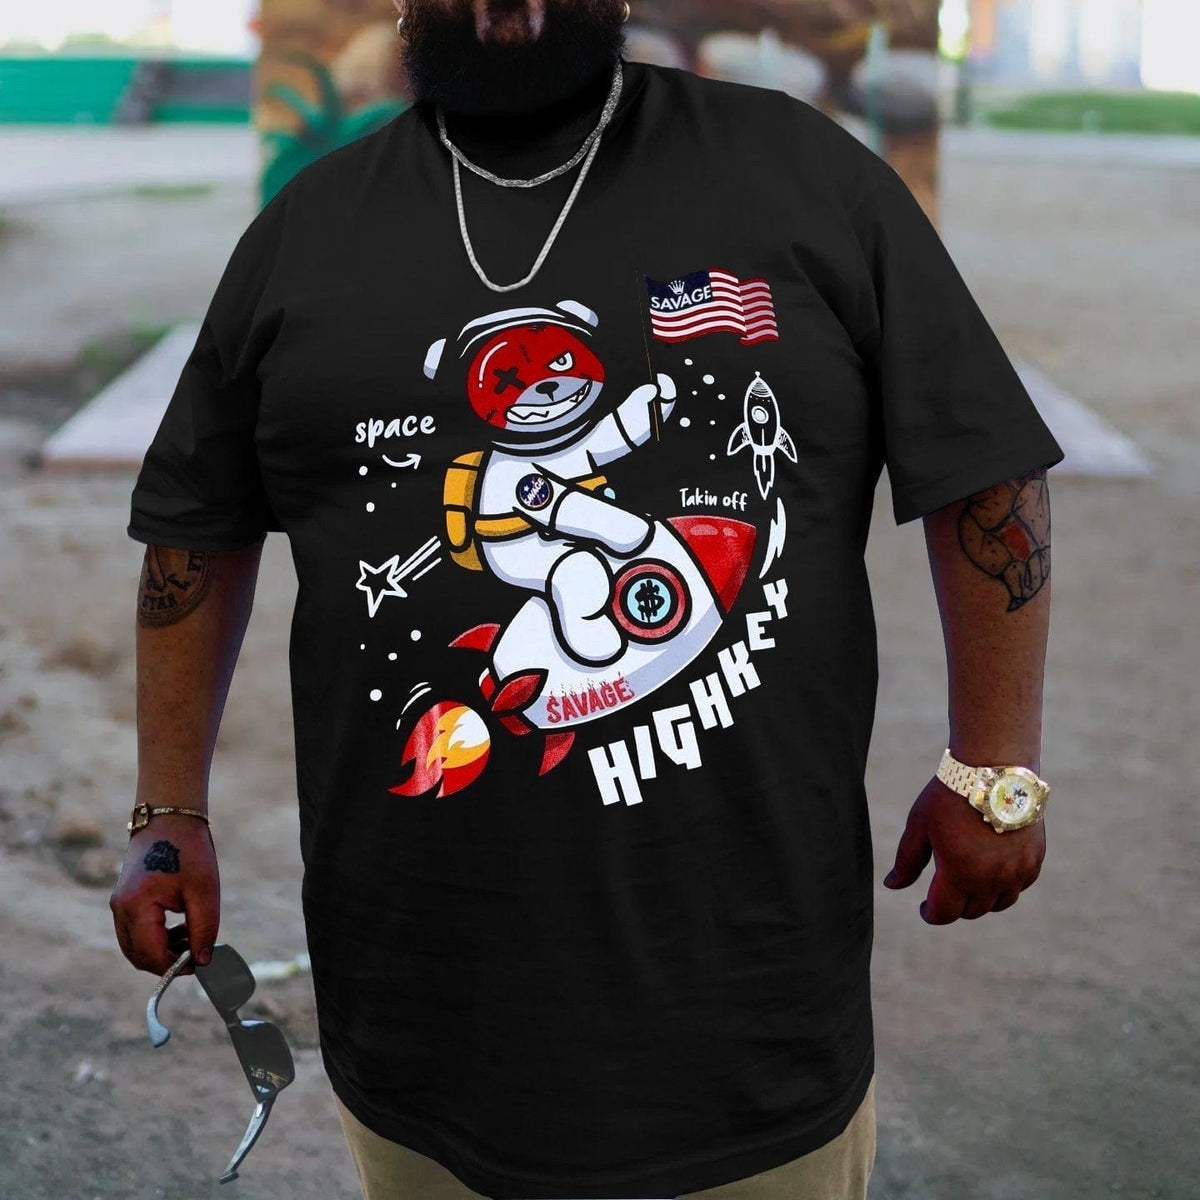 Go To The Space, Creative Men Plus Size Oversize T-shirt for Big & Tall Man